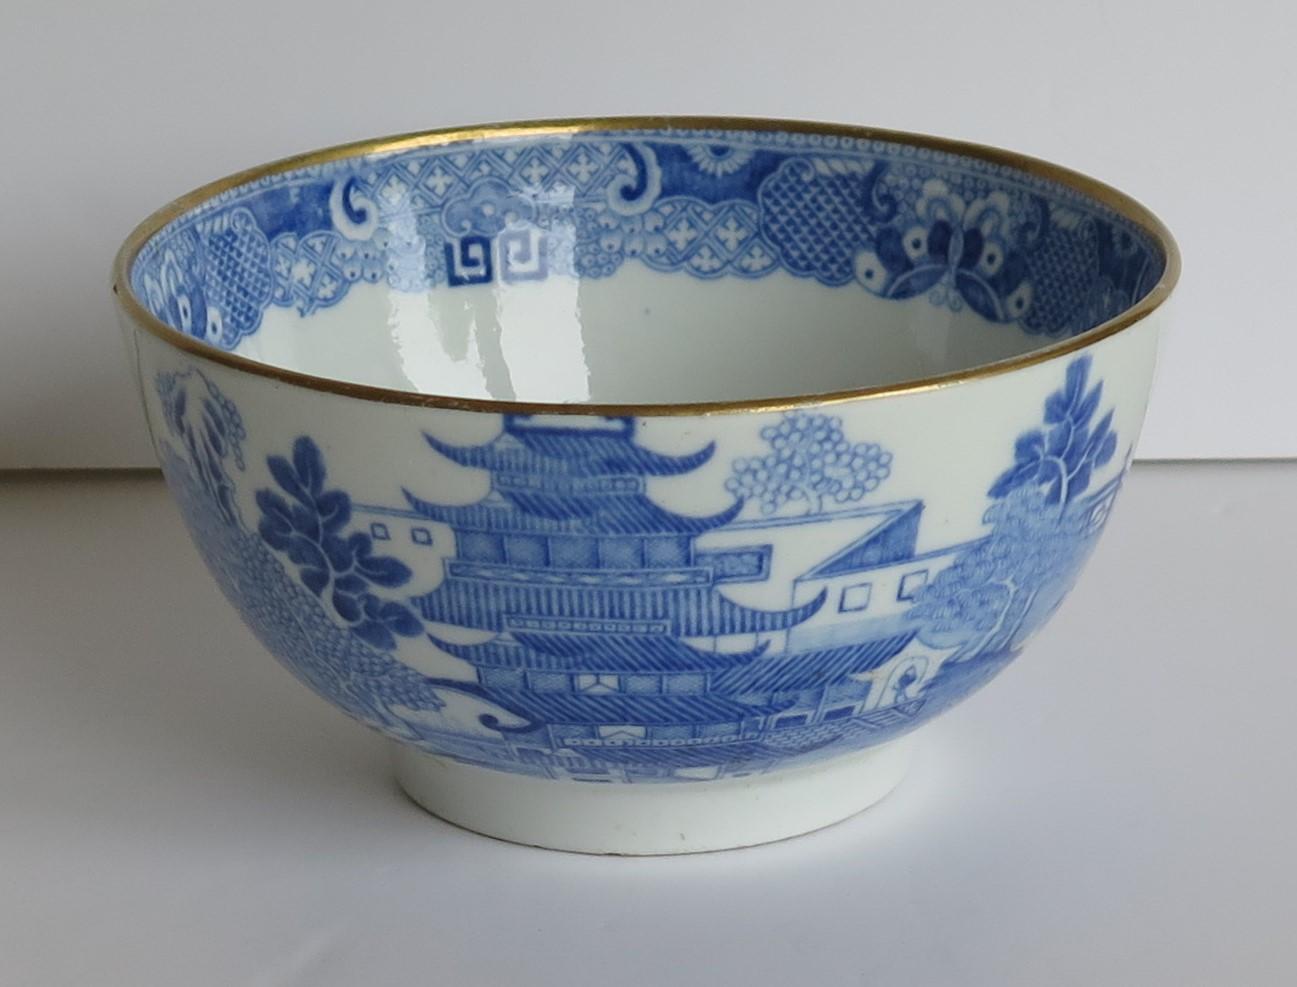 This is a porcelain bowl made by Miles Mason (Mason's), Staffordshire Potteries, England around the turn of the 18th century, circa 1805. 

The bowl is well potted on a low foot.

It is decorated in the under-glaze blue printed Pagoda or